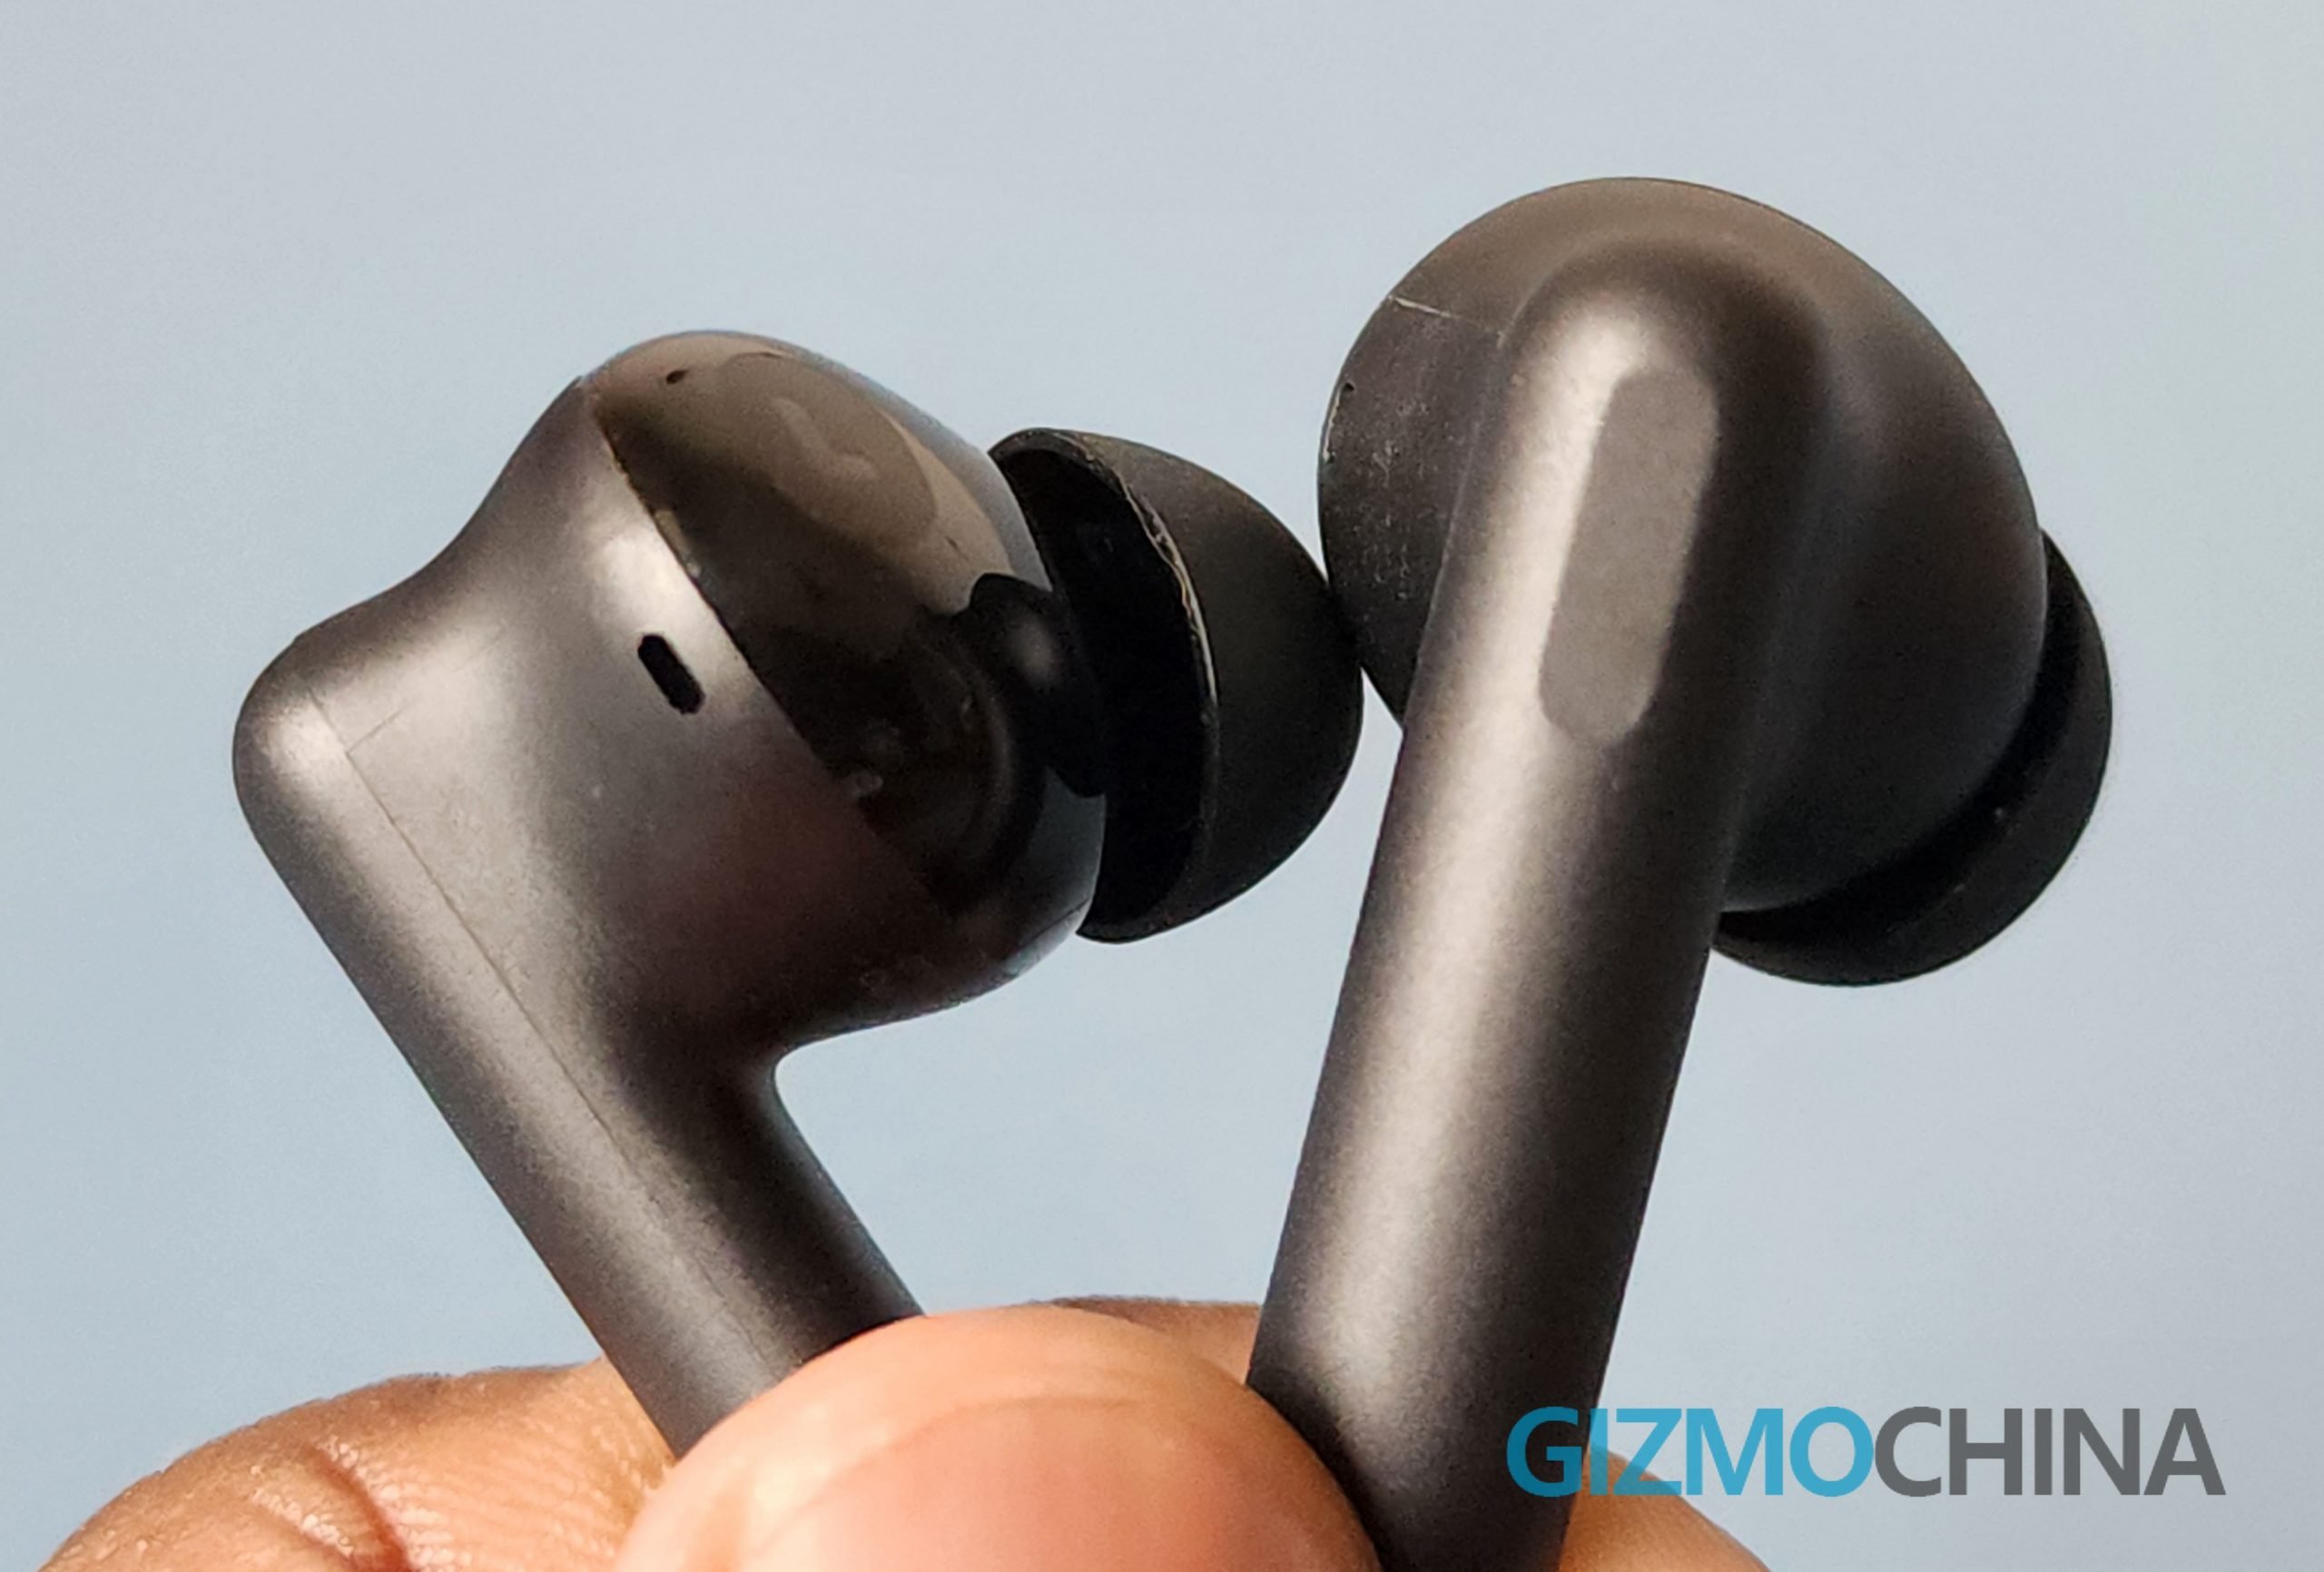 OPPO Enco Buds 2 review: One of the best earbuds with titanium drivers  priced under Rs 2,000 (~$25) - Gizmochina